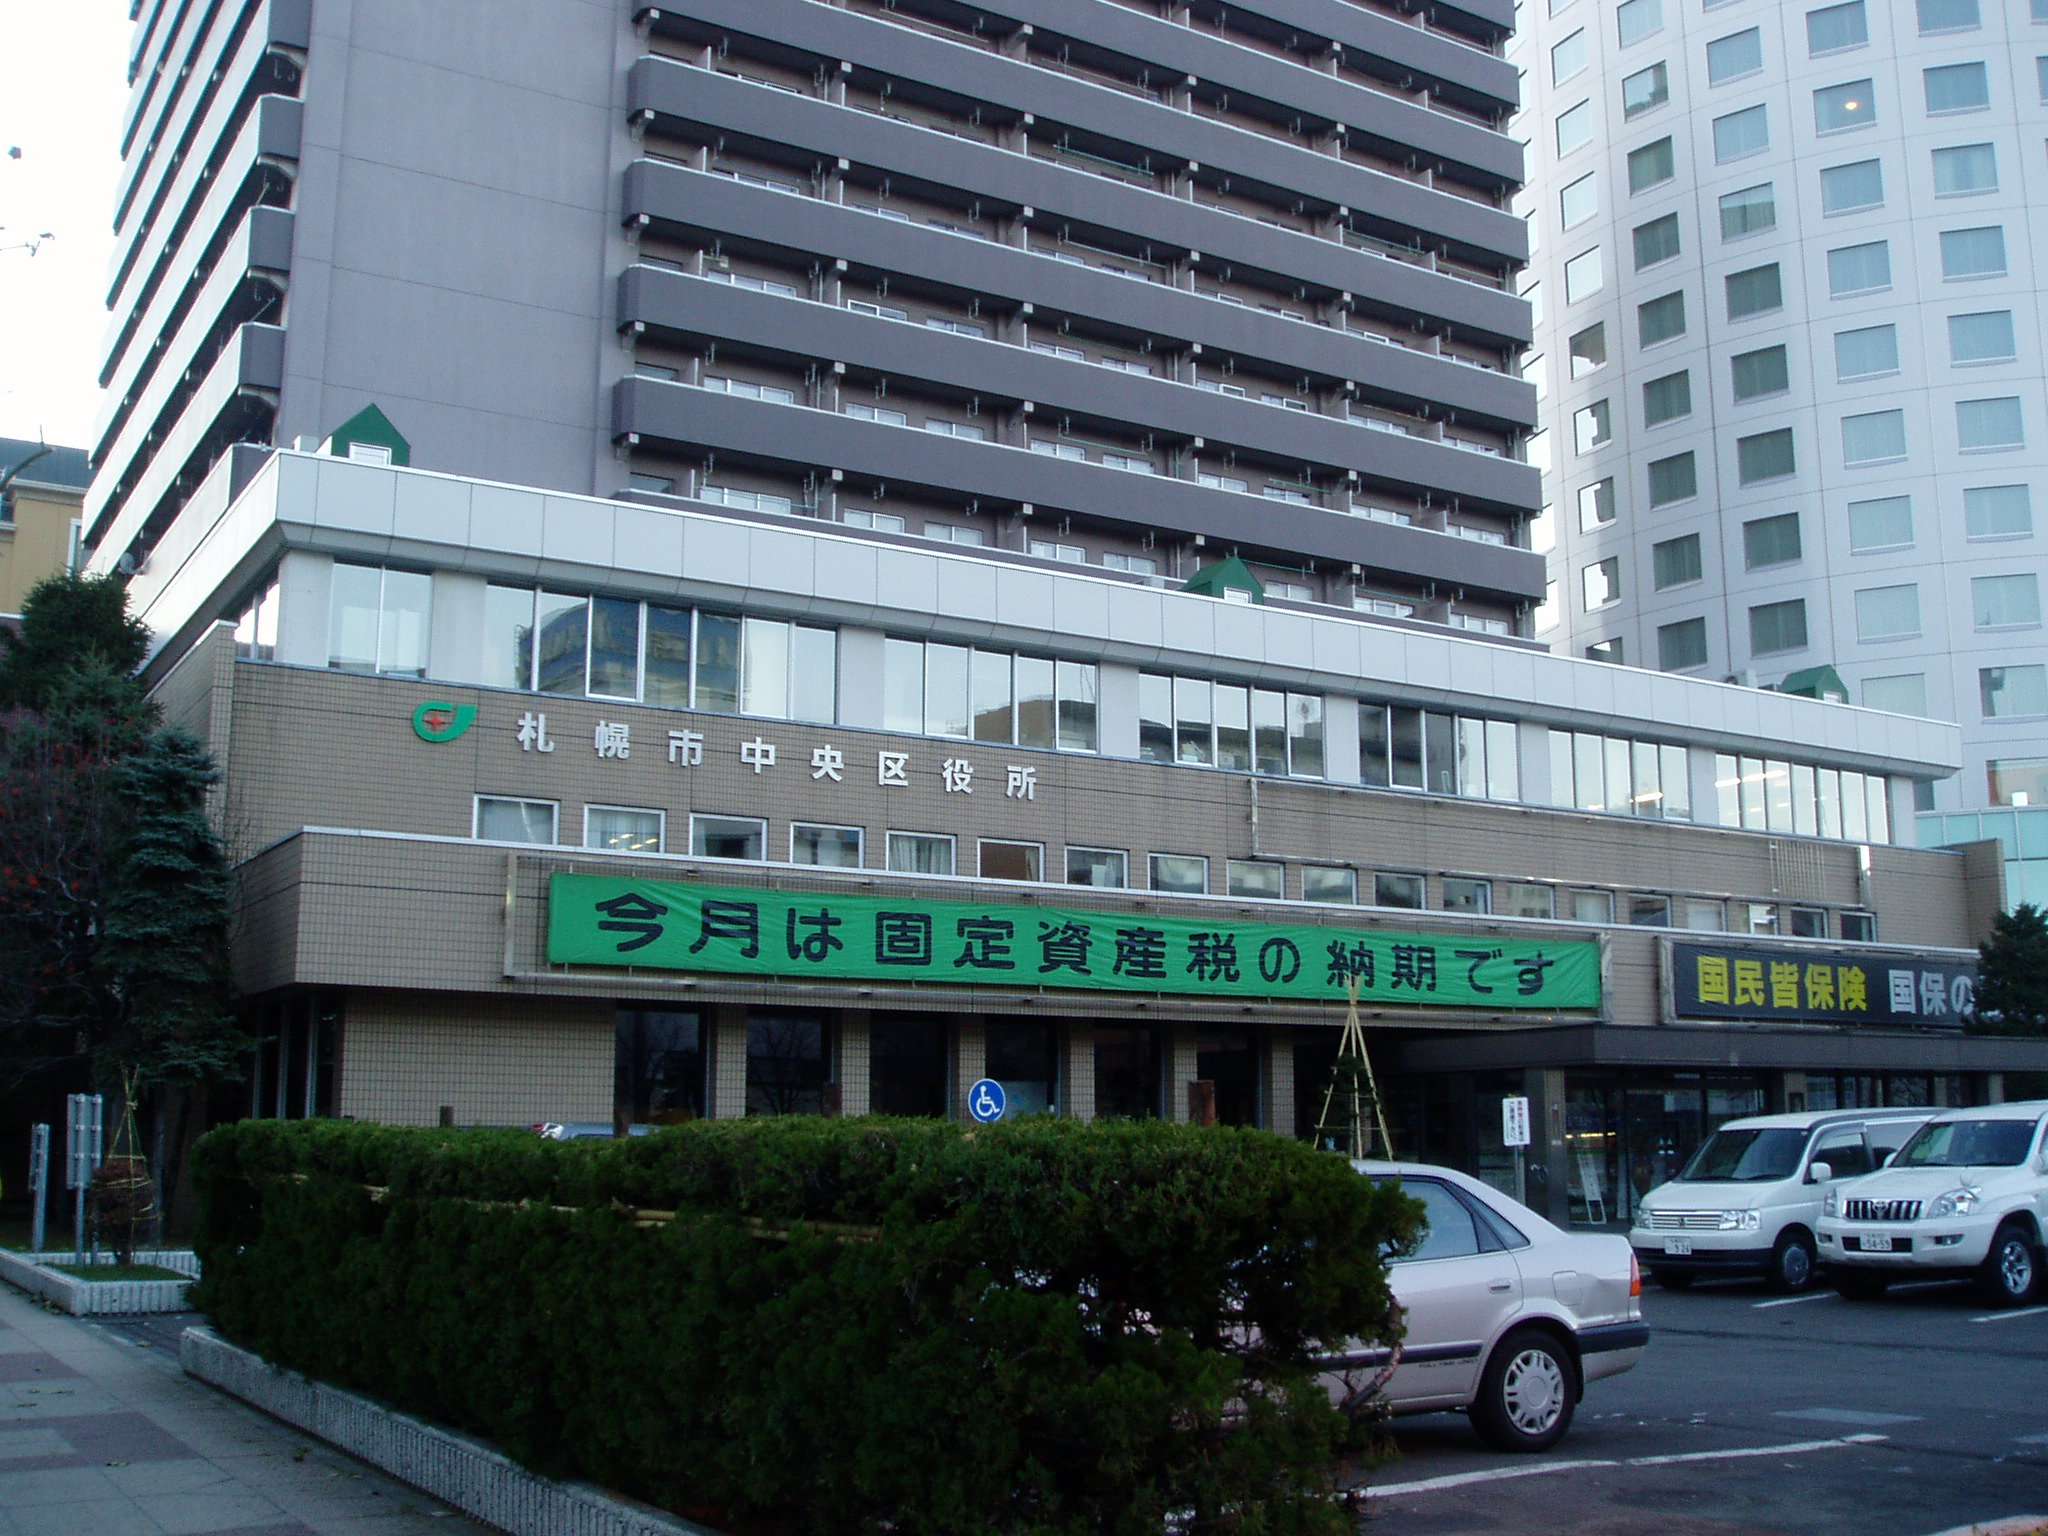 Government office. 448m to Sapporo city center ward office (government office)